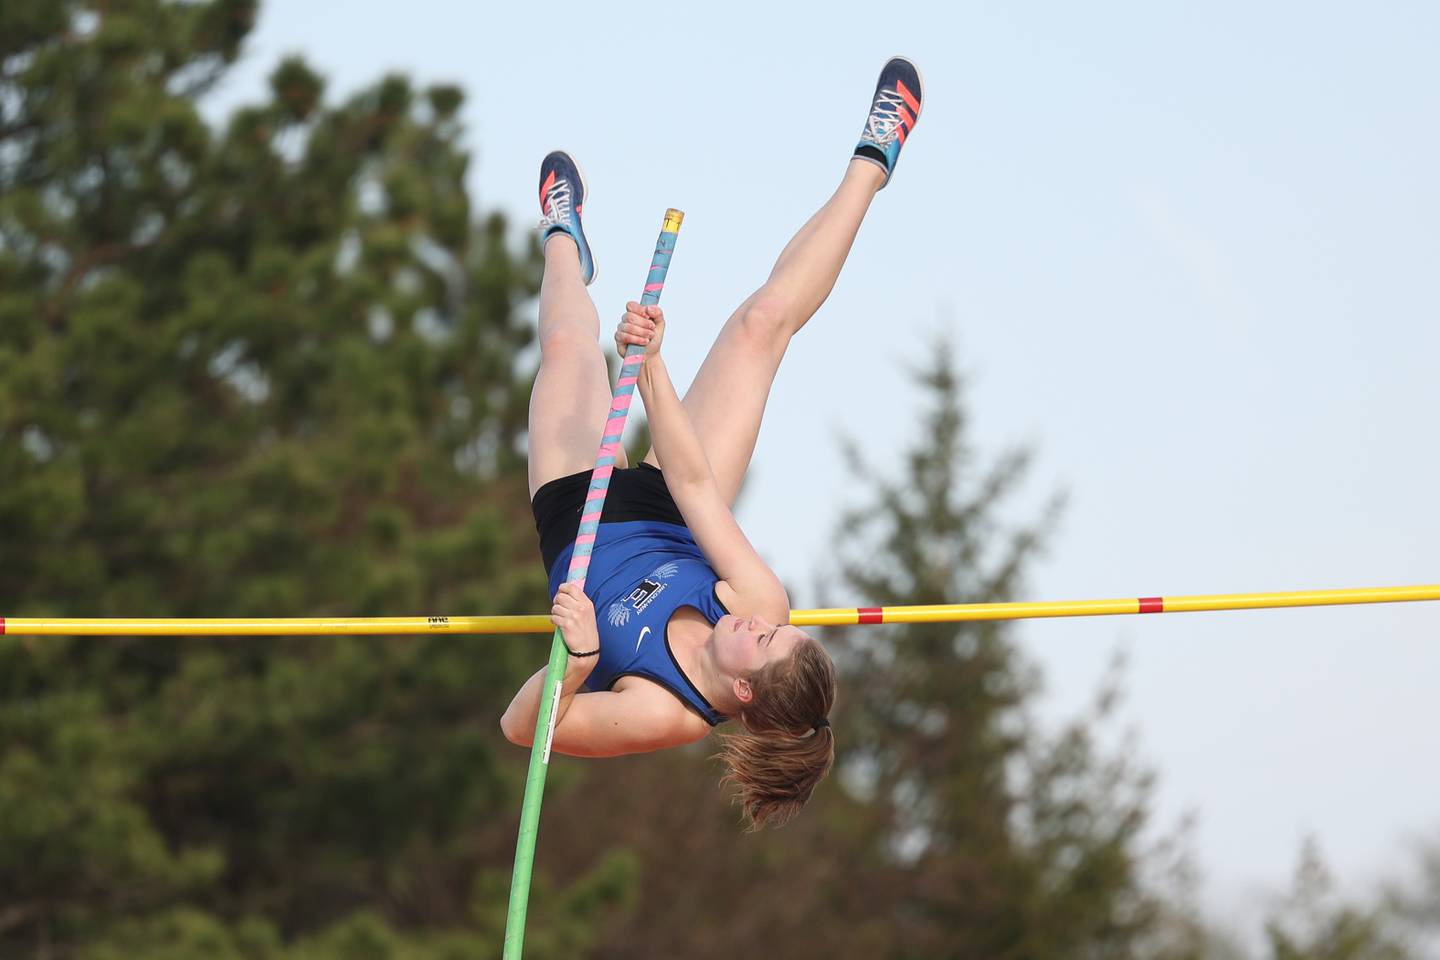 Lincoln-Way East’s Jaiden Knoop clears the bar in the pole vault at the Minooka Girls Track and Field Invitational on Friday, April 14, 2023, in Minooka.